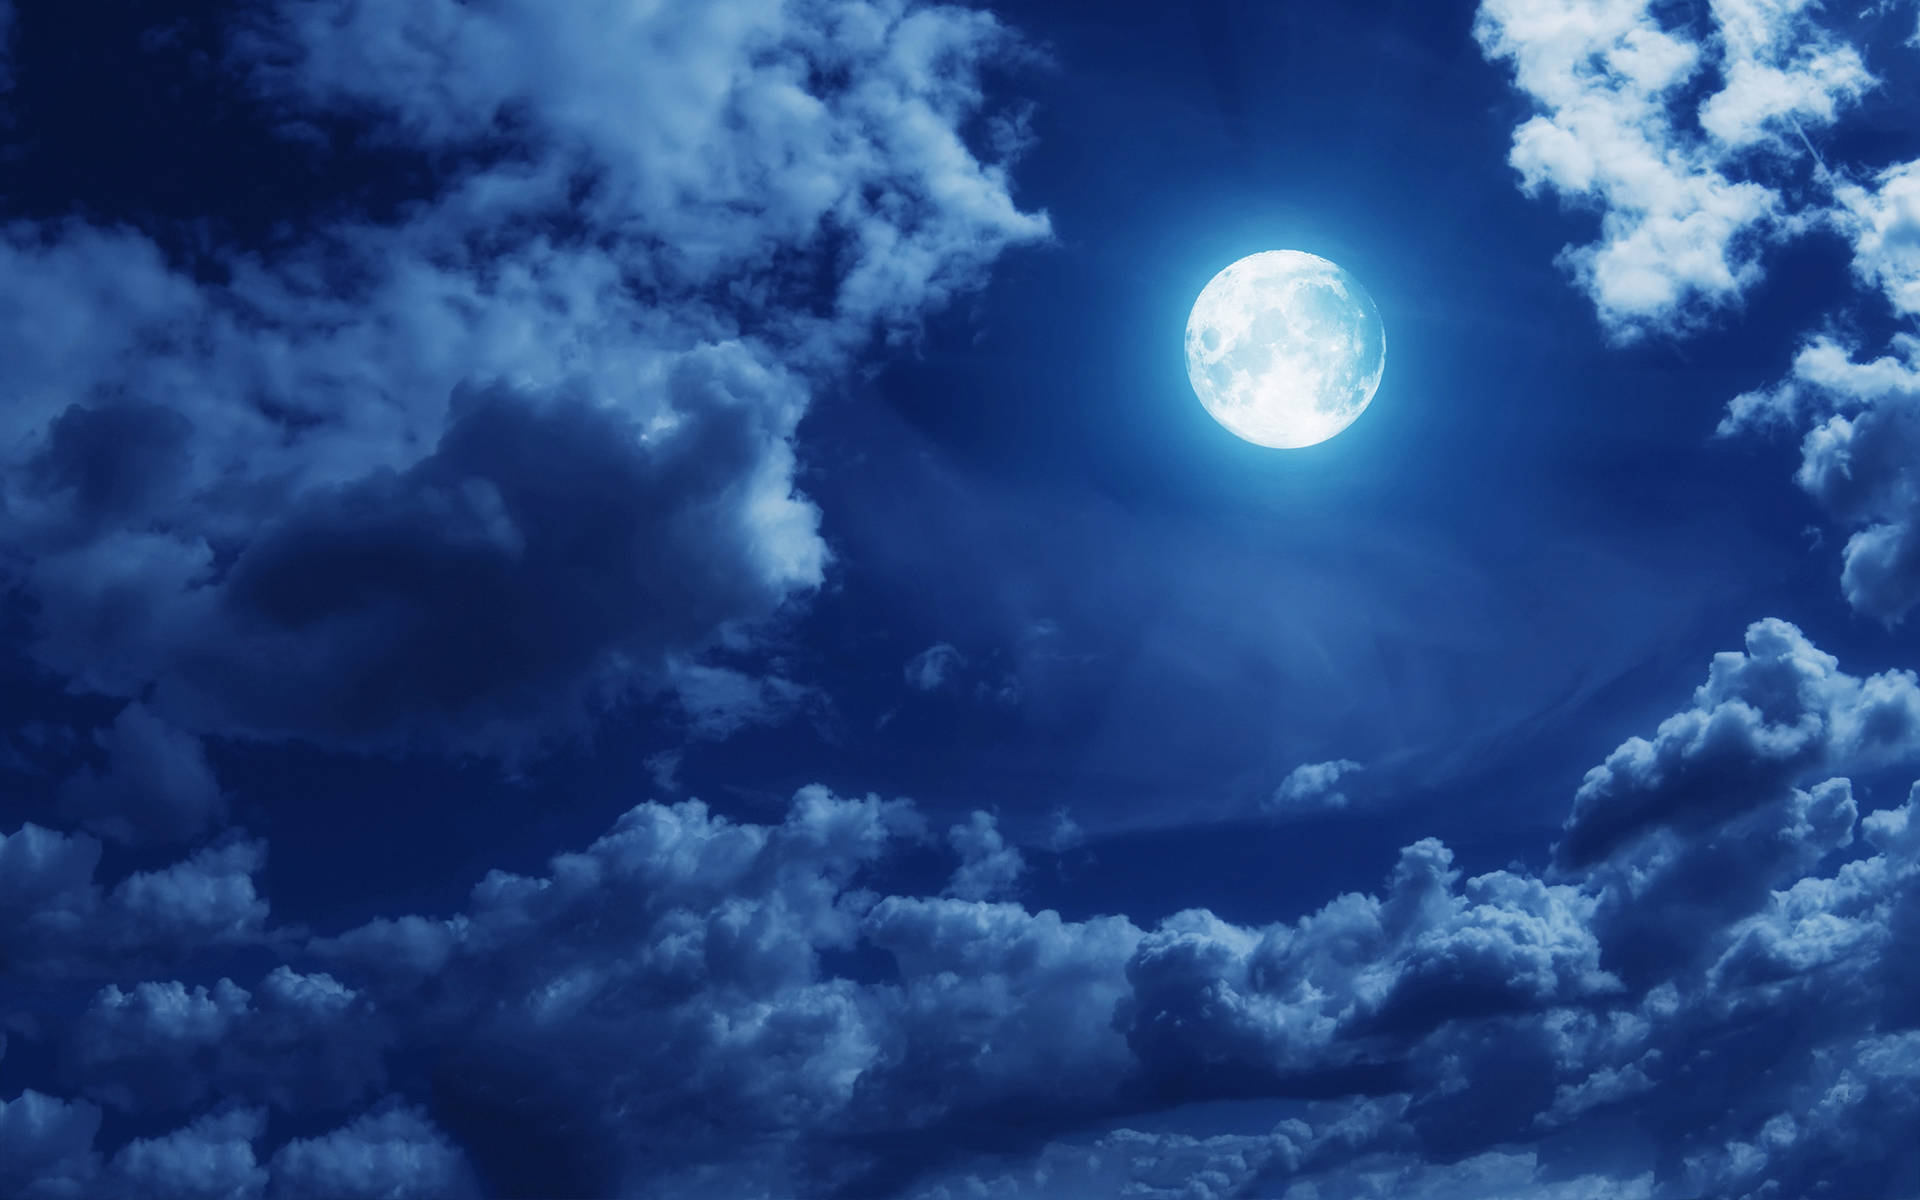 Aesthetic Clouds With Full Moon Wallpaper